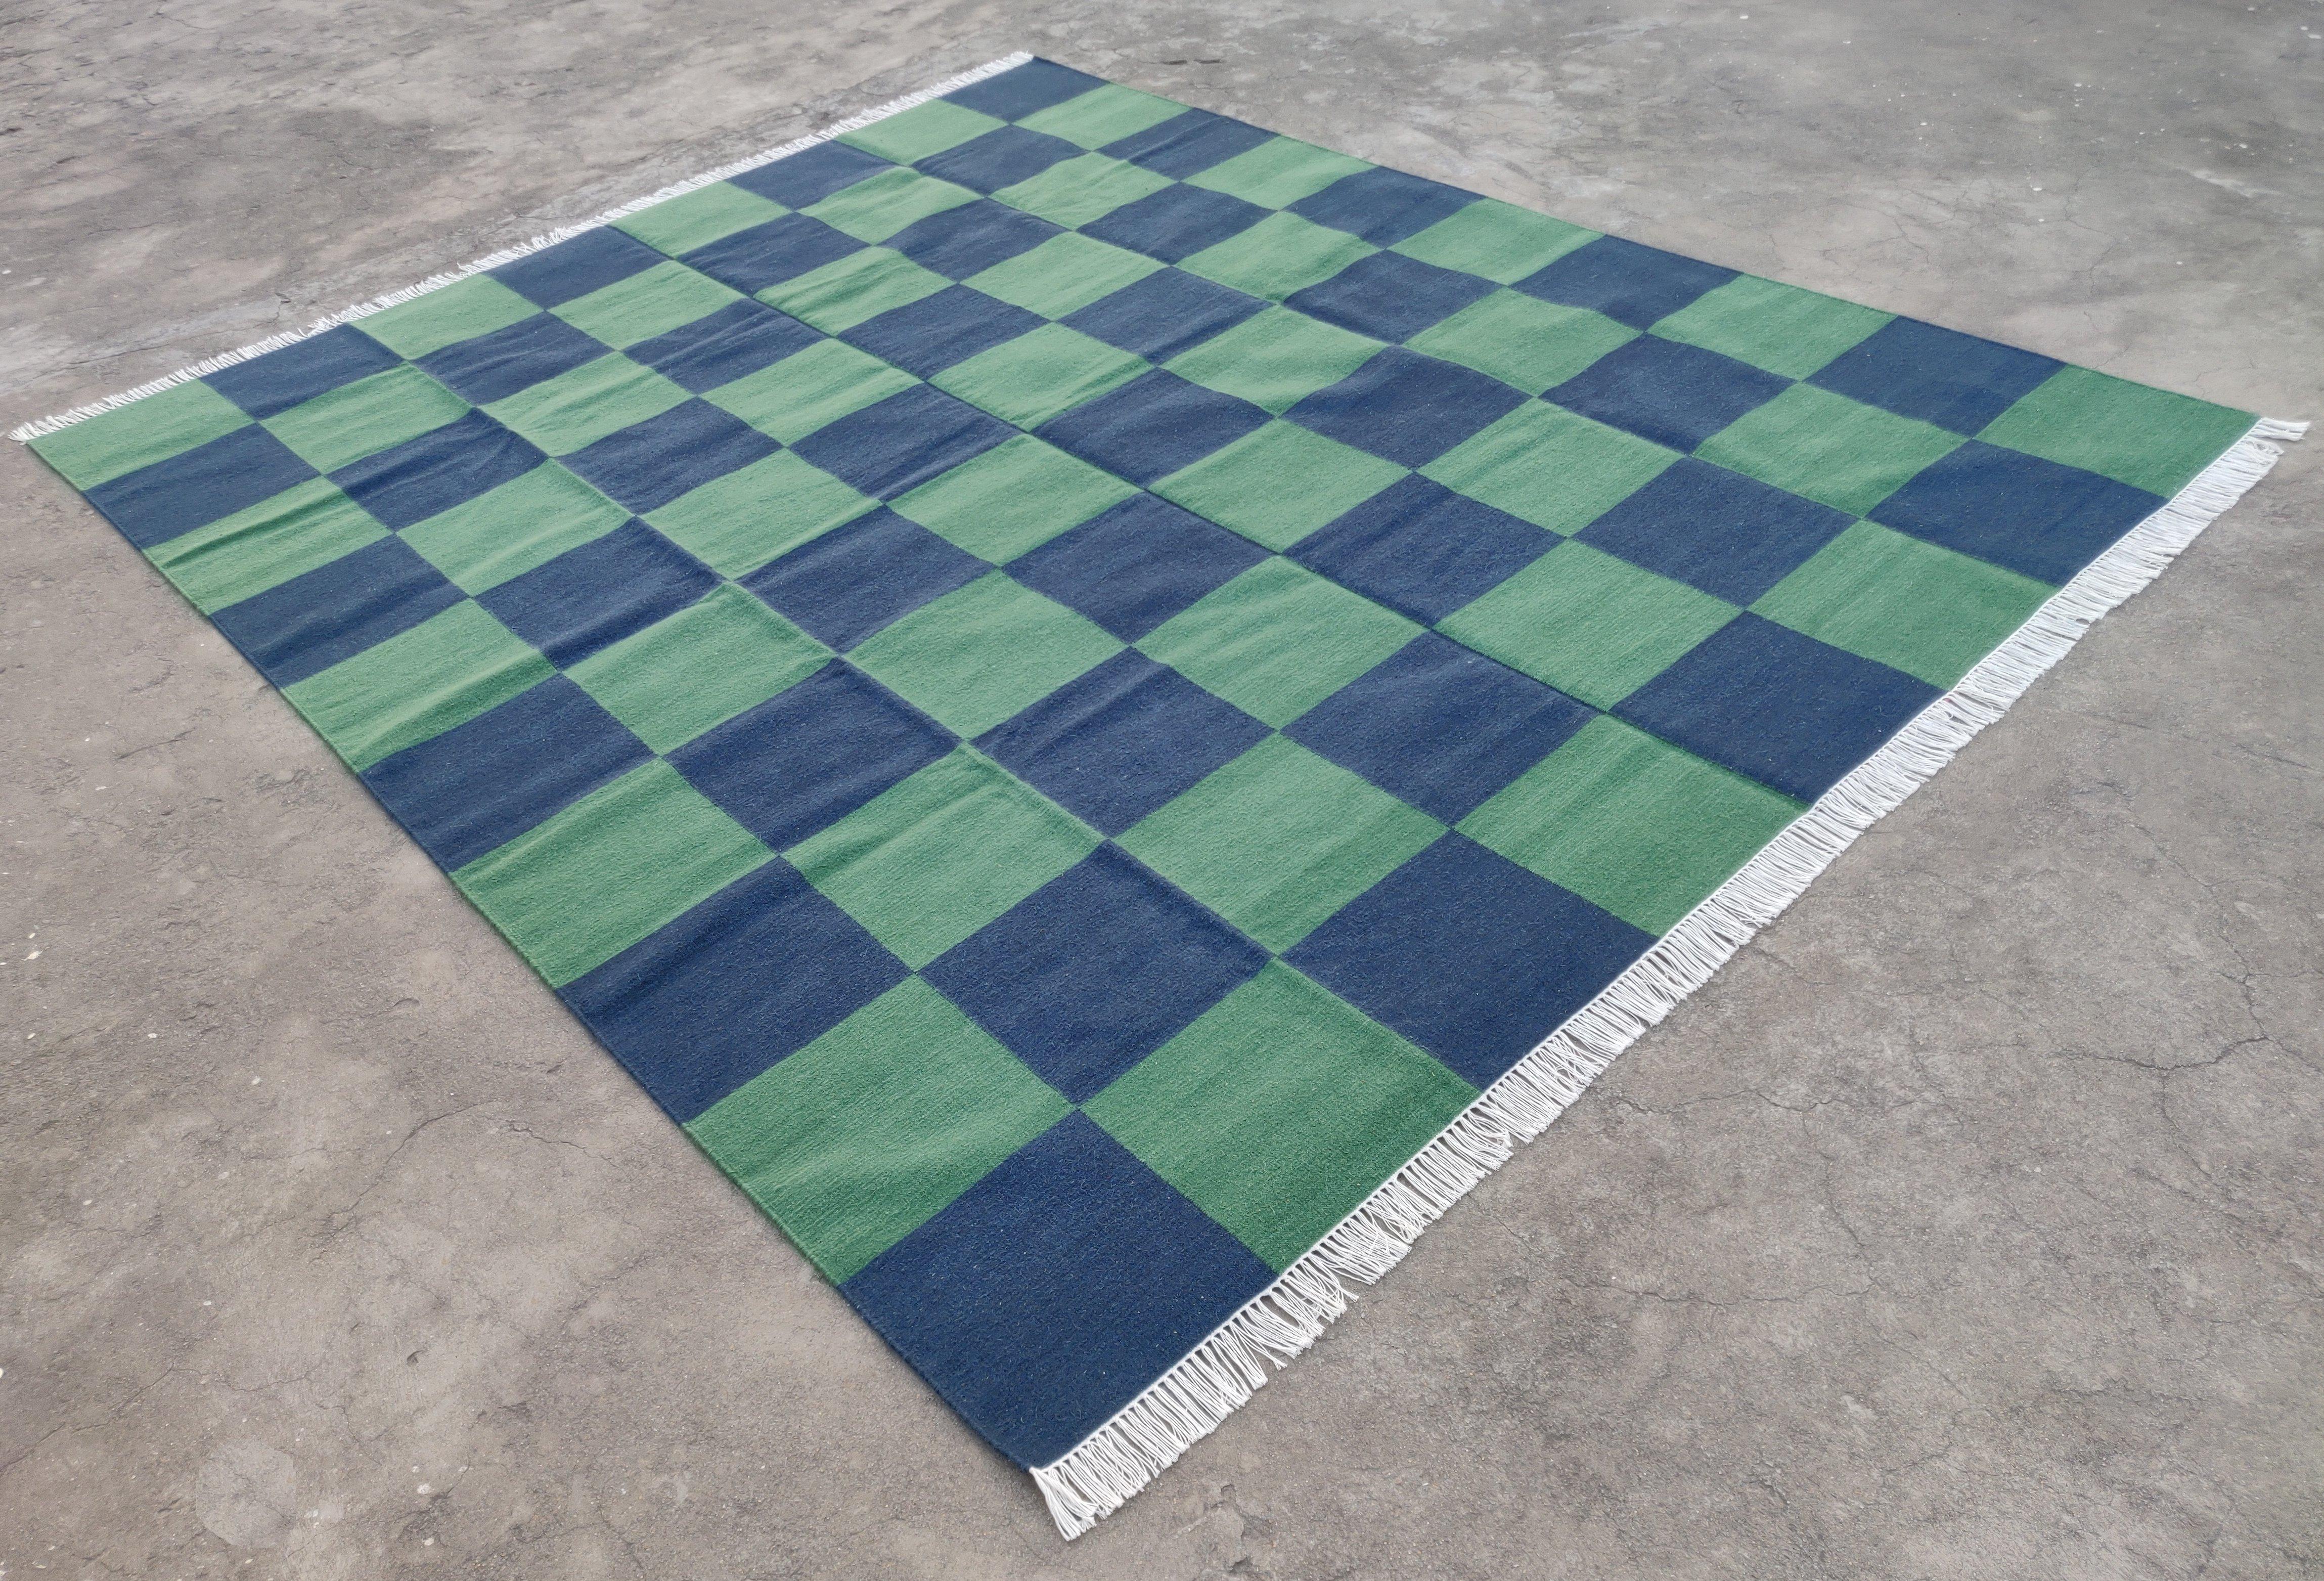 Hand-Woven Handmade Woolen Area Flat Weave Rug, 6x9 Blue And Green Tile Checked Dhurrie Rug For Sale